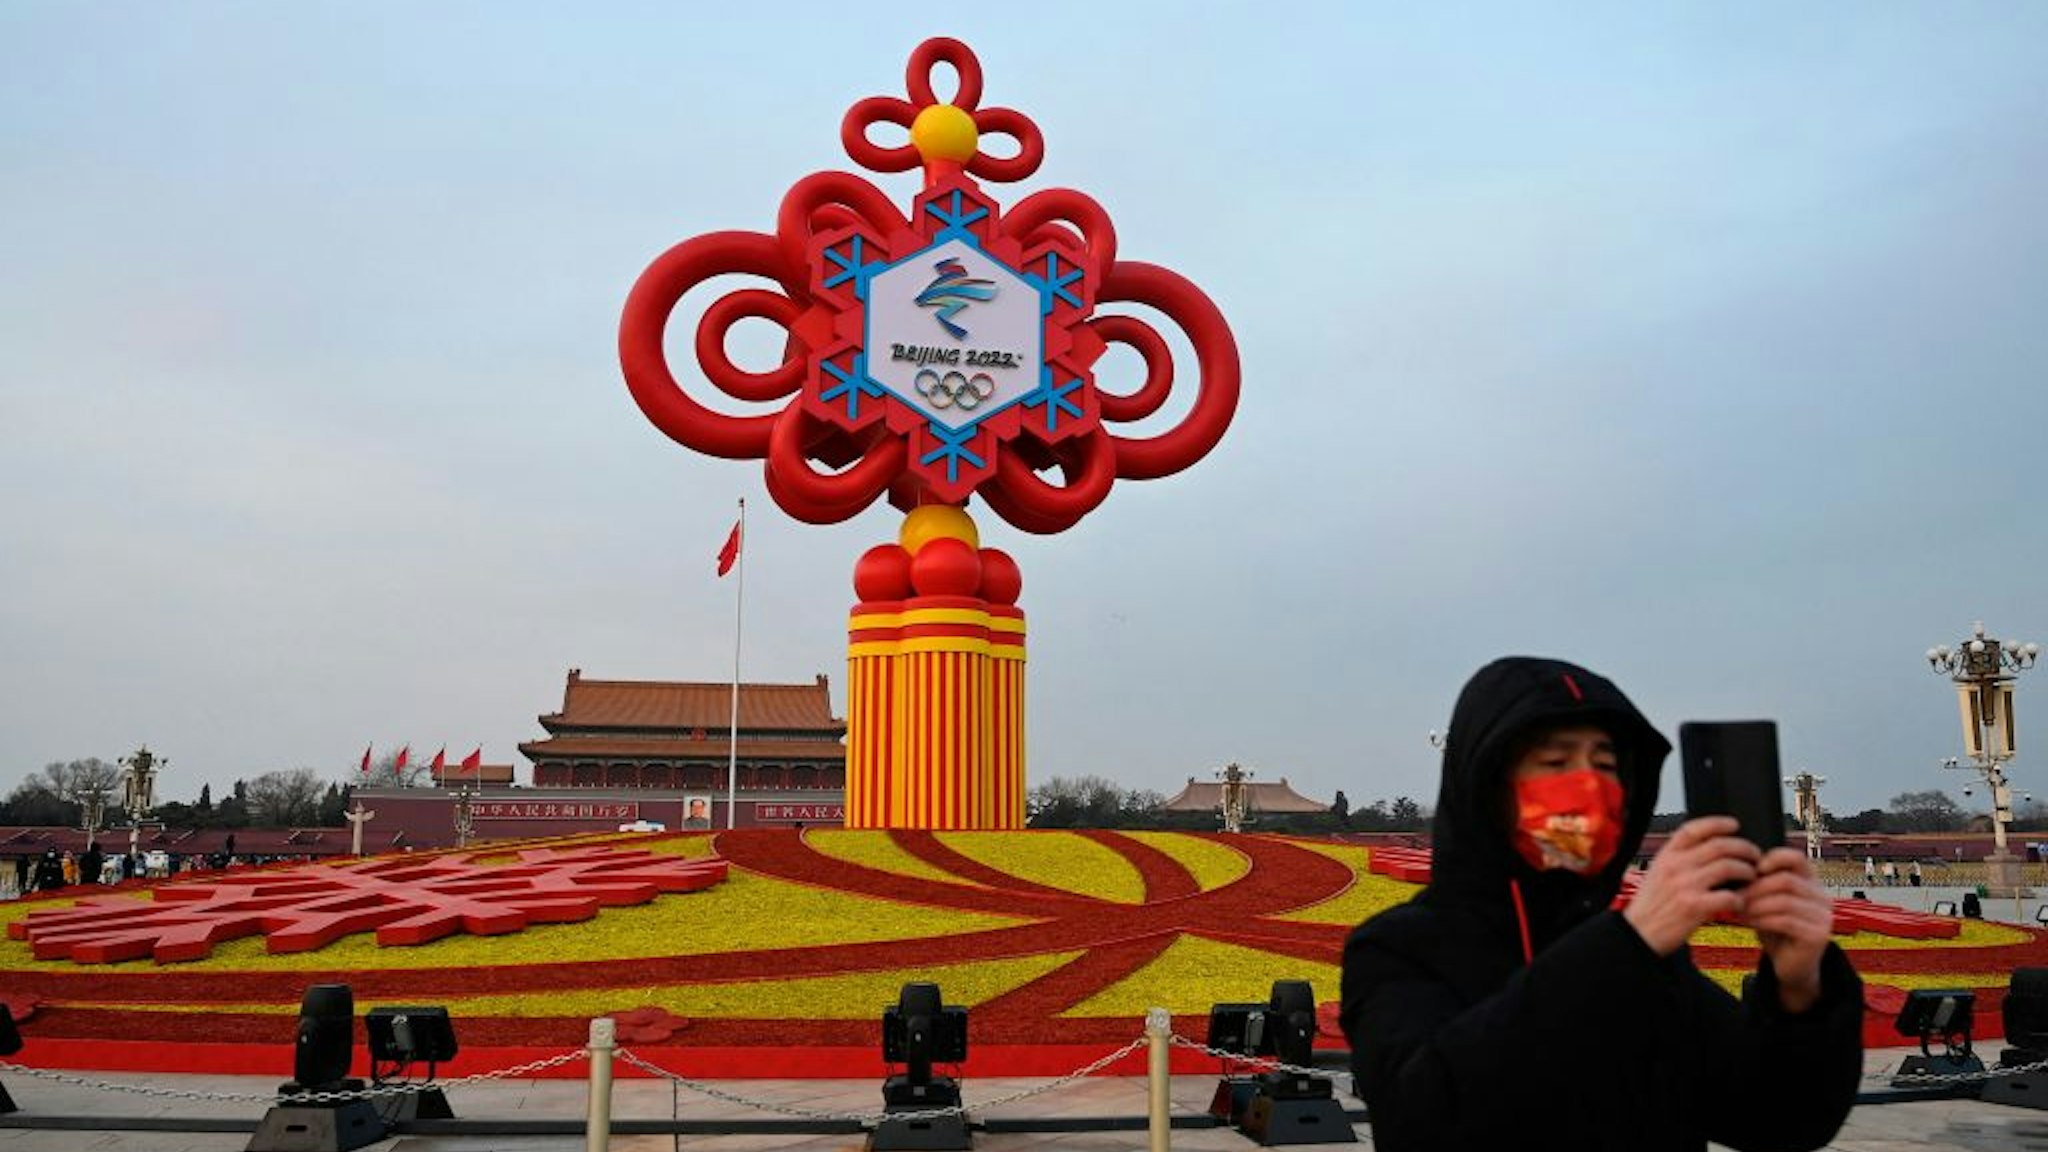 A man records video footage in front of an installation displaying a Chinese knot with the logo of the Beijing 2022 Winter Olympics at Tiananmen Square in Beijing on January 19, 2022. (Photo by JADE GAO / AFP) (Photo by JADE GAO/AFP via Getty Images)